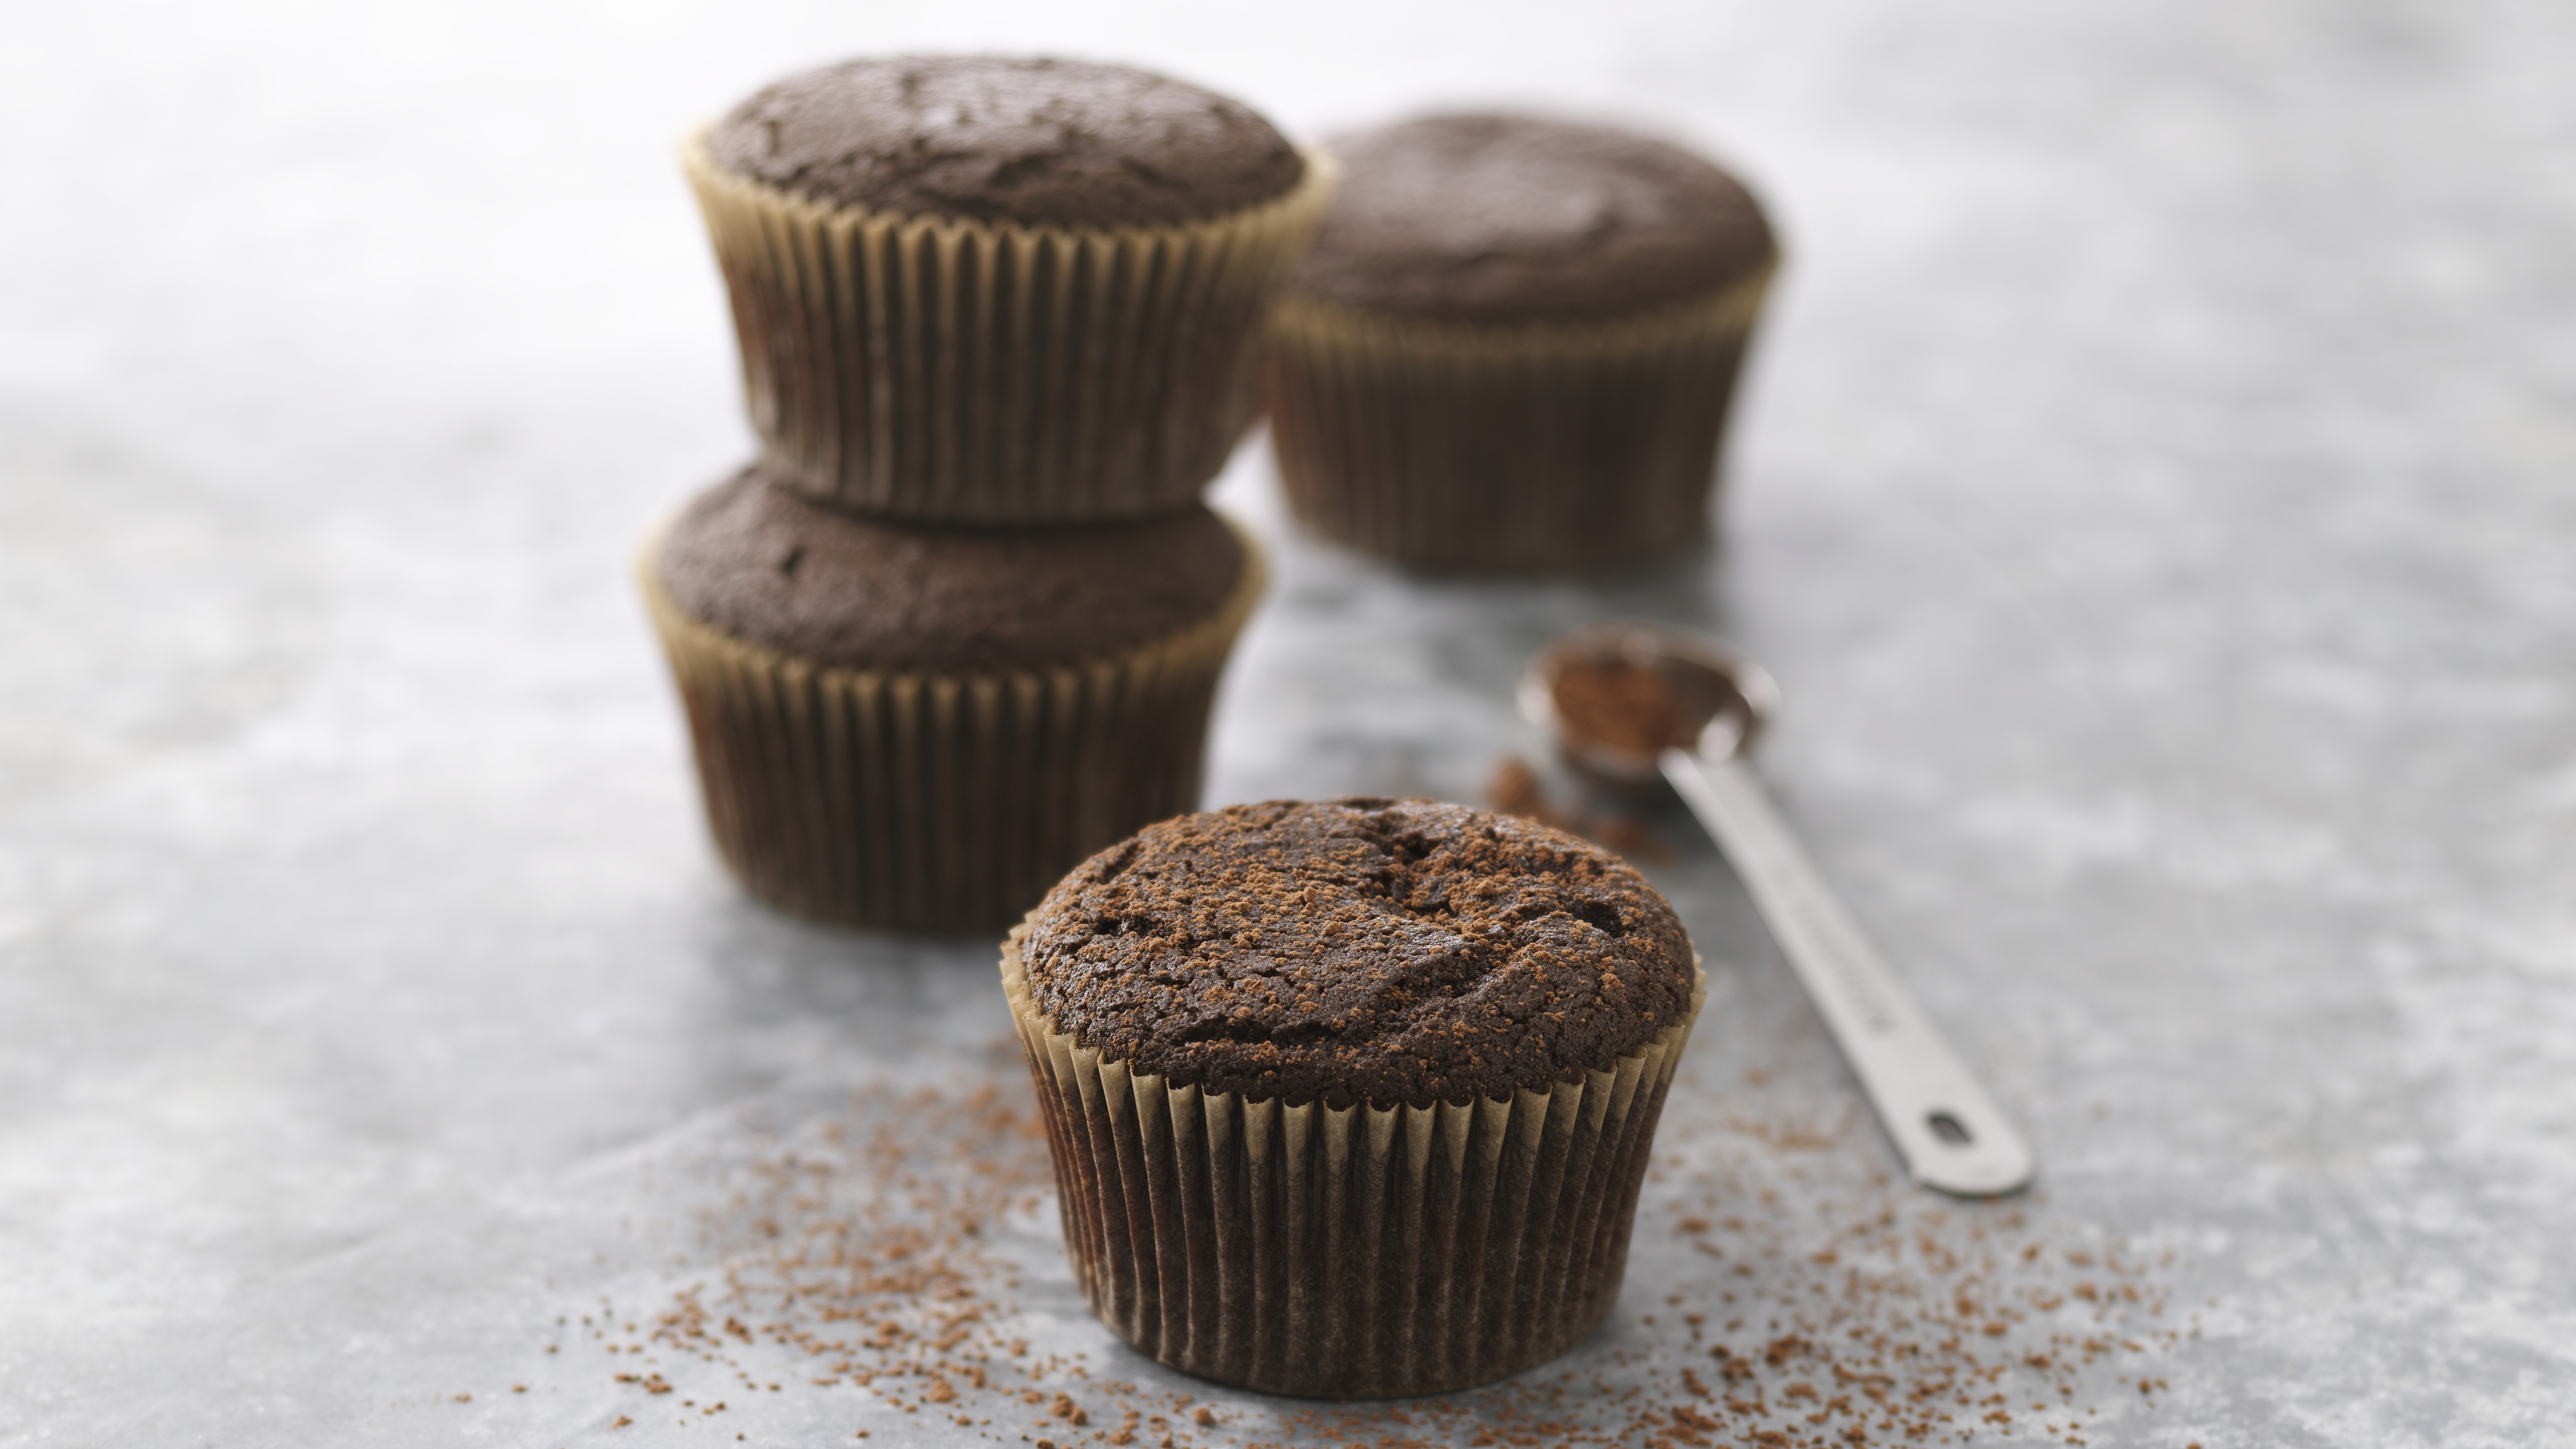 Chocolate Filled Cupcakes Recipe - Kitchen Fun With My 3 Sons